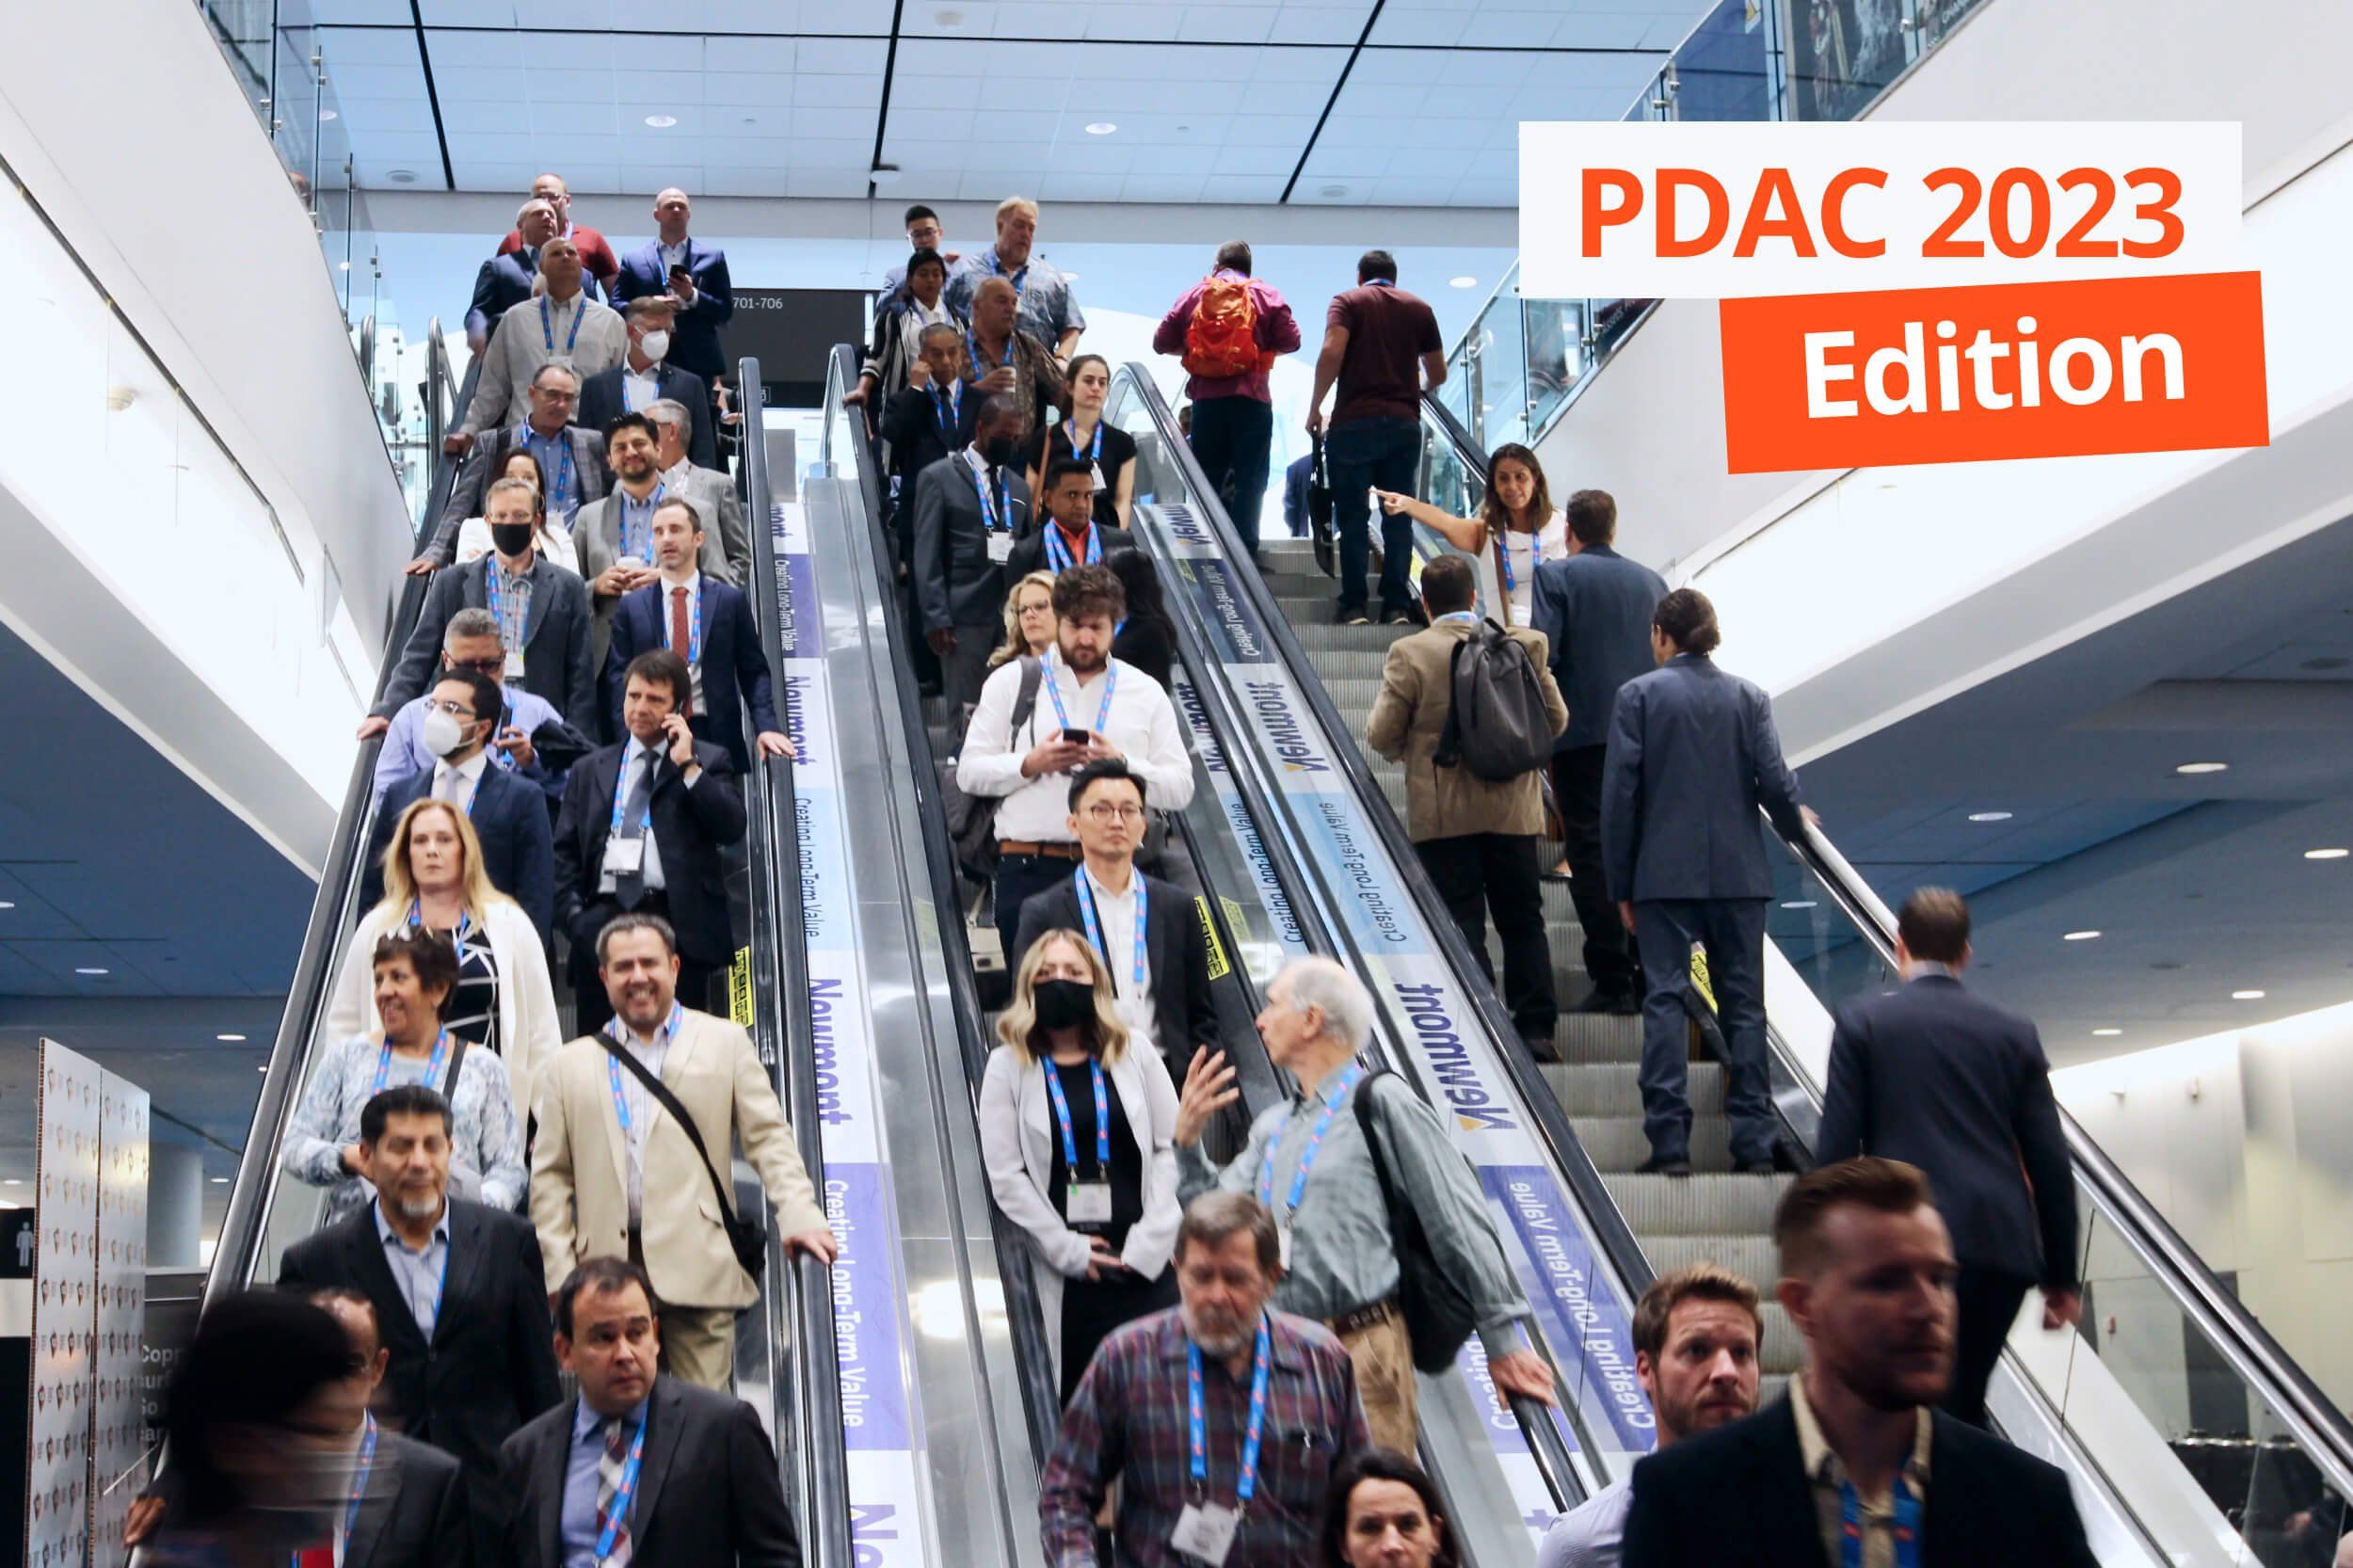 PDAC 2023 Here's What You Need to Know